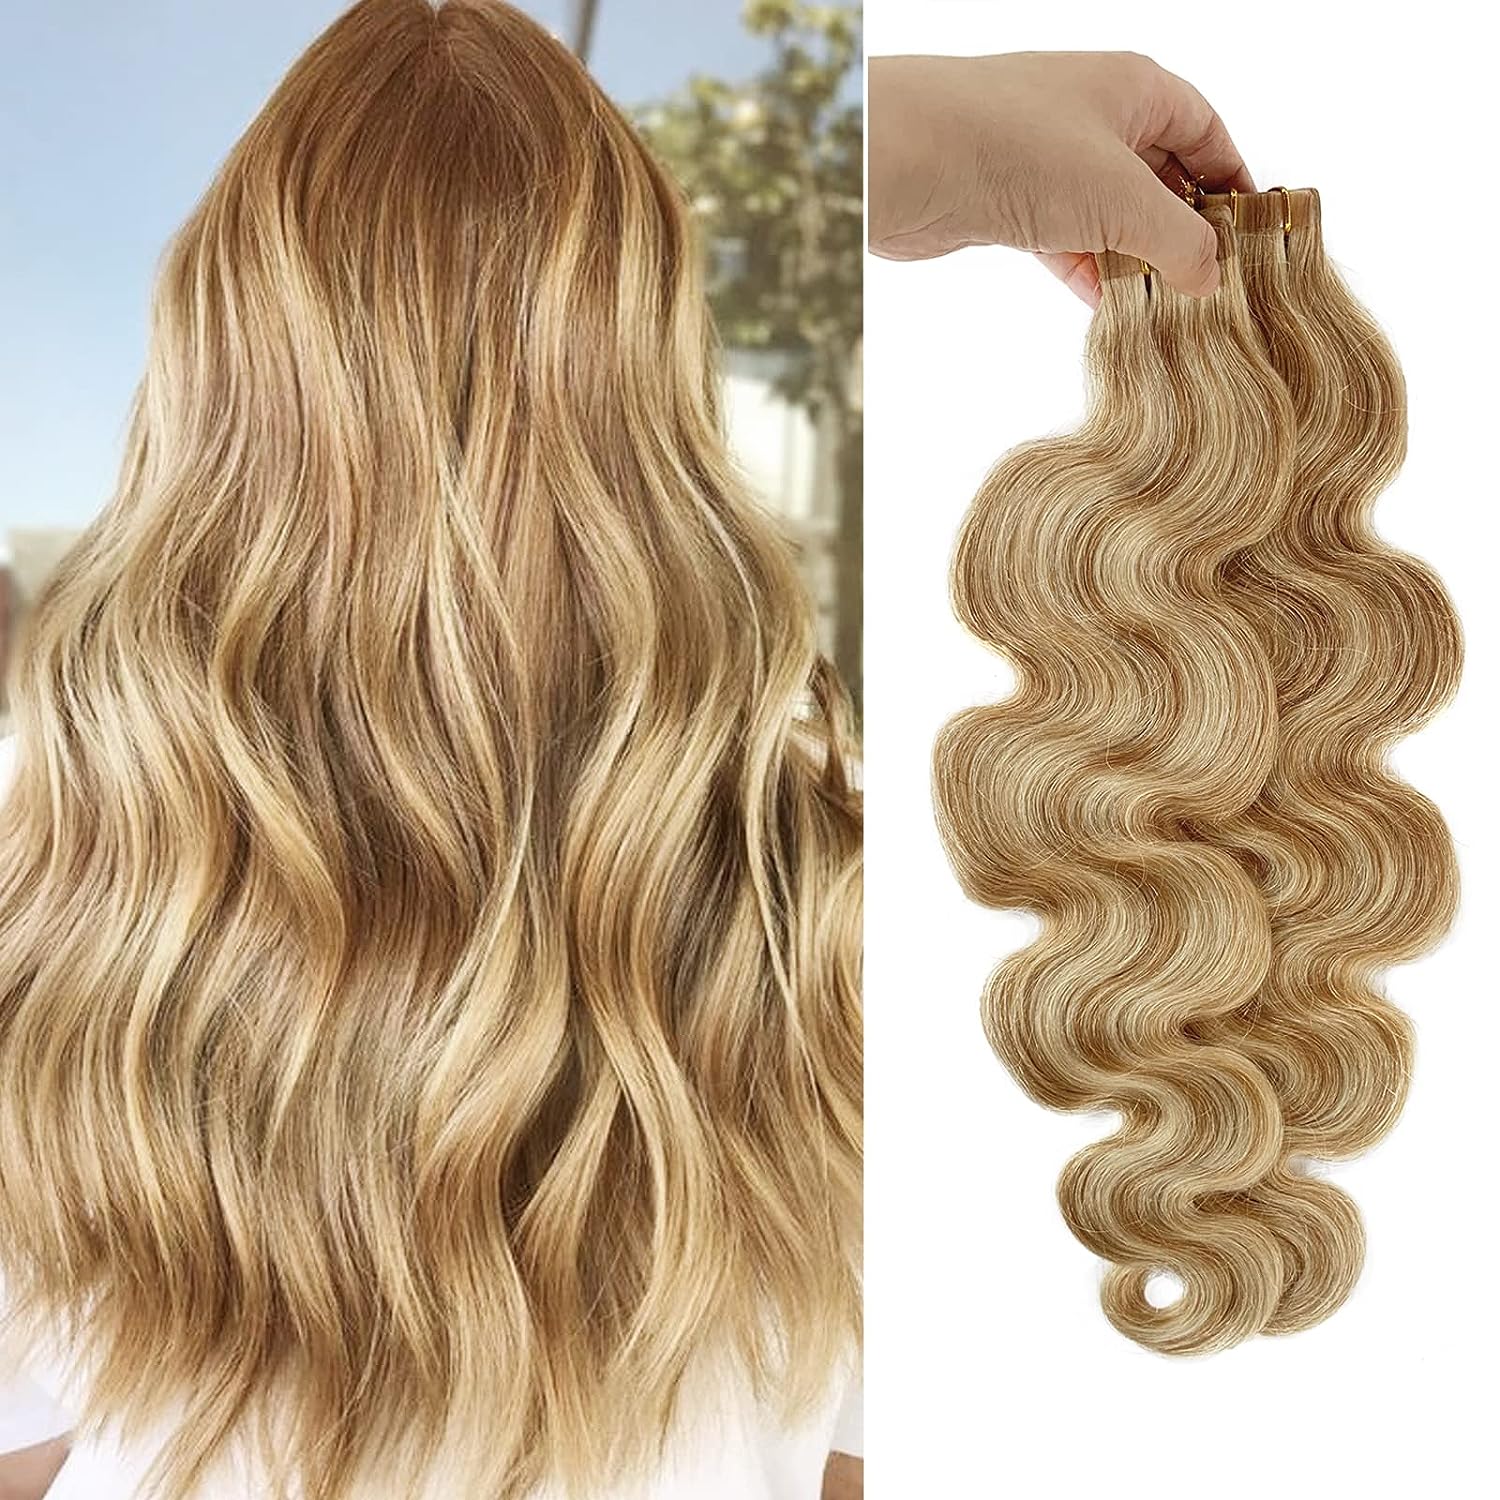 Body Wave Tape in Blonde Balayage Hair Extensions 100% [...]